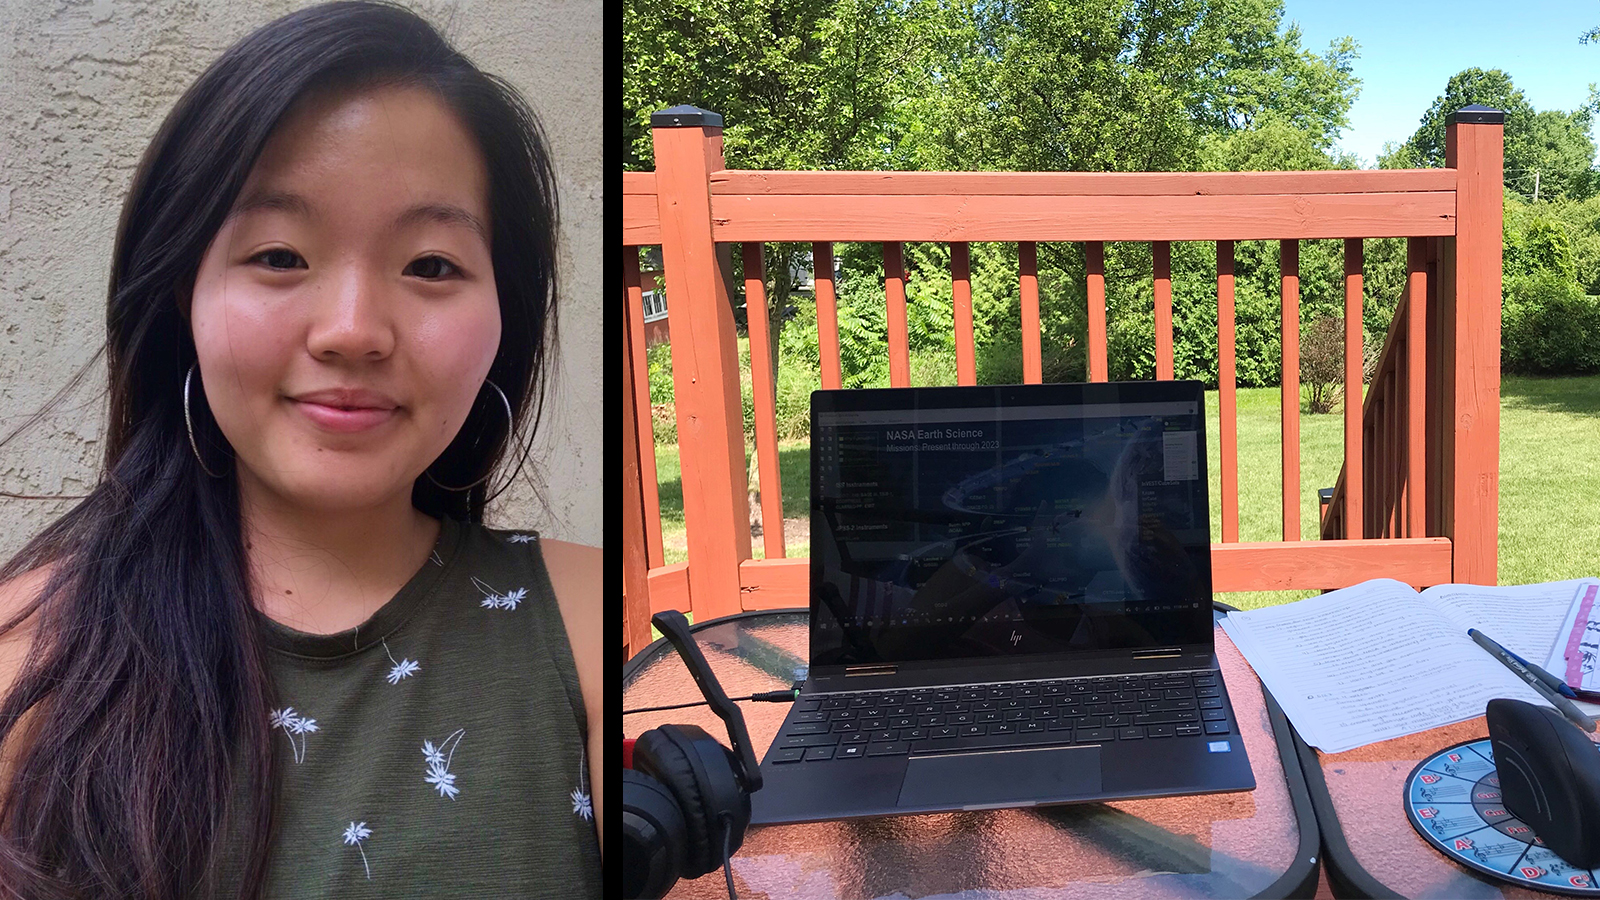 In the image on the left, Sophia Yoo poses for a selfie. In the image on the right, her laptop, mouse, headphones and open notebook are shown at a table outside surrounded by a wooden porch and a green landscape.